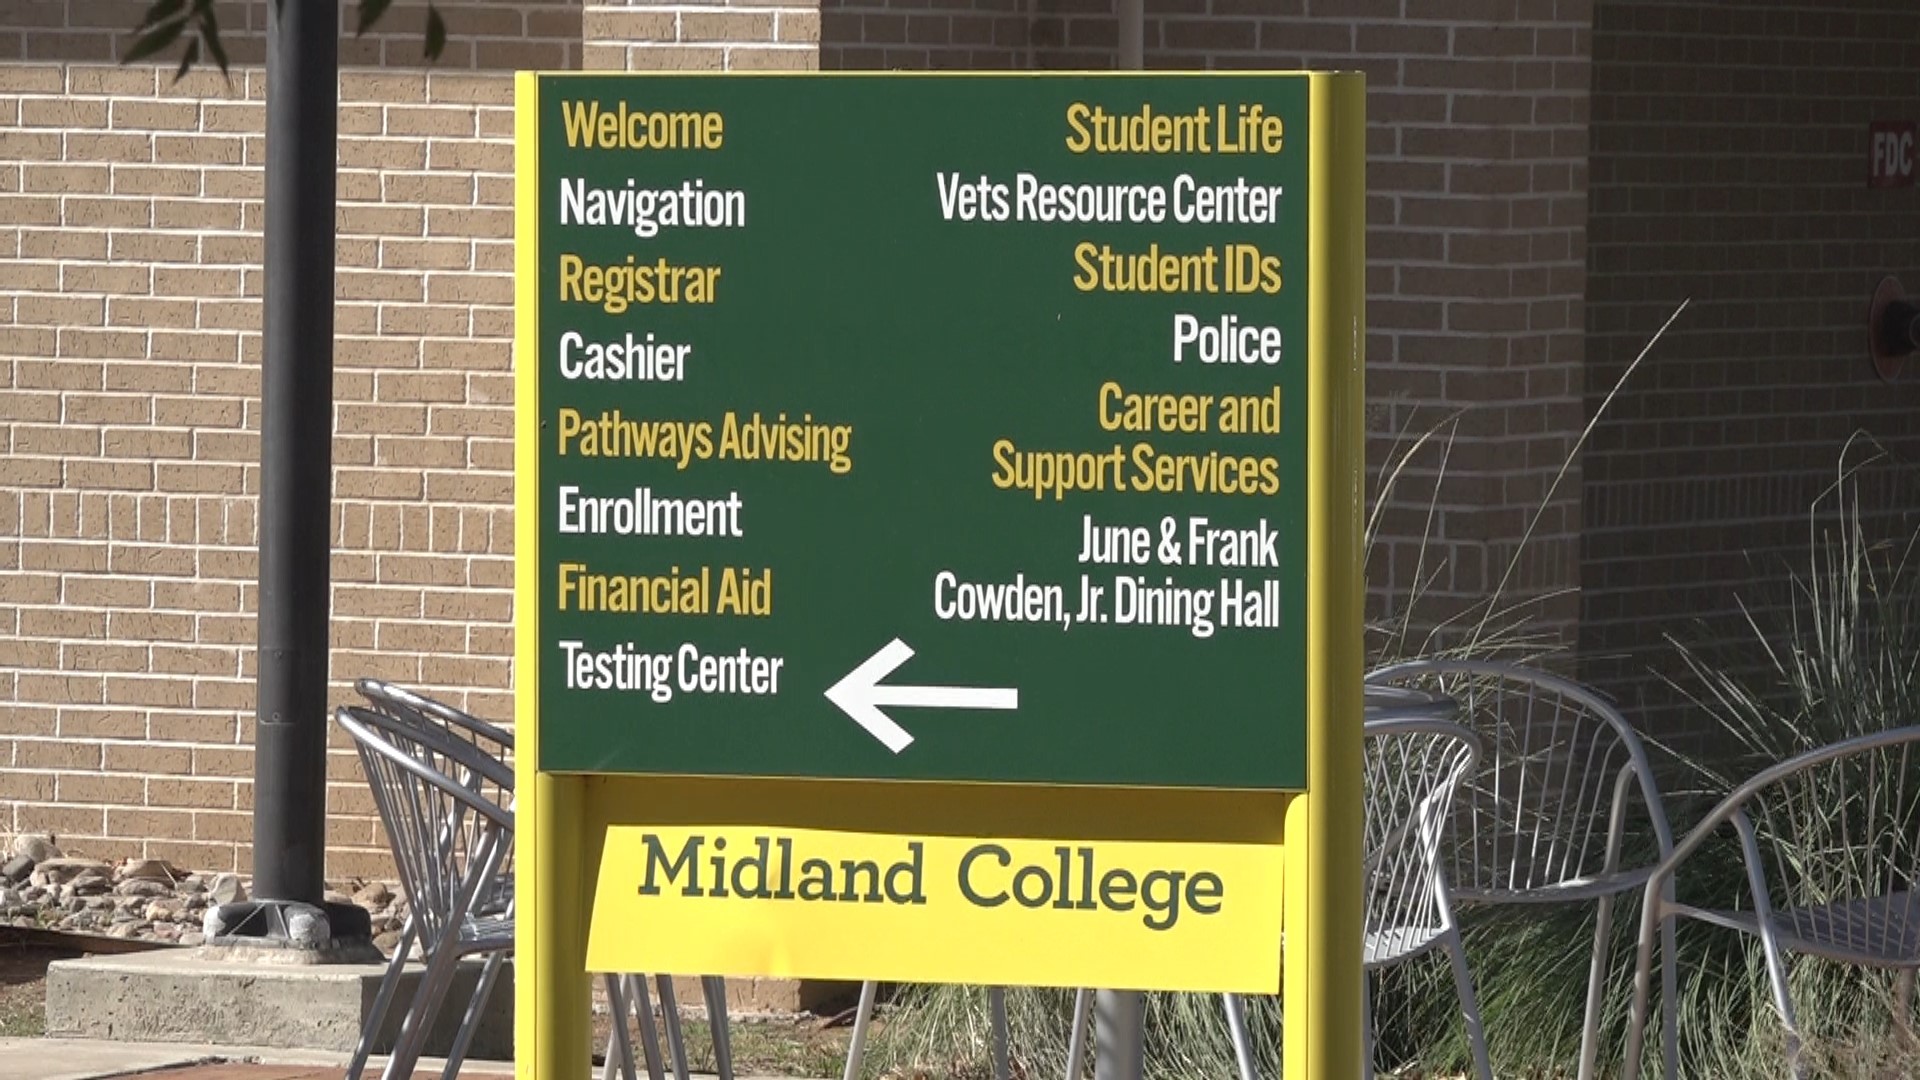 Midland College's Military Resource Center will be honoring Veterans on Veterans Day with a celebration at 11 a.m. at Beal Plaza.